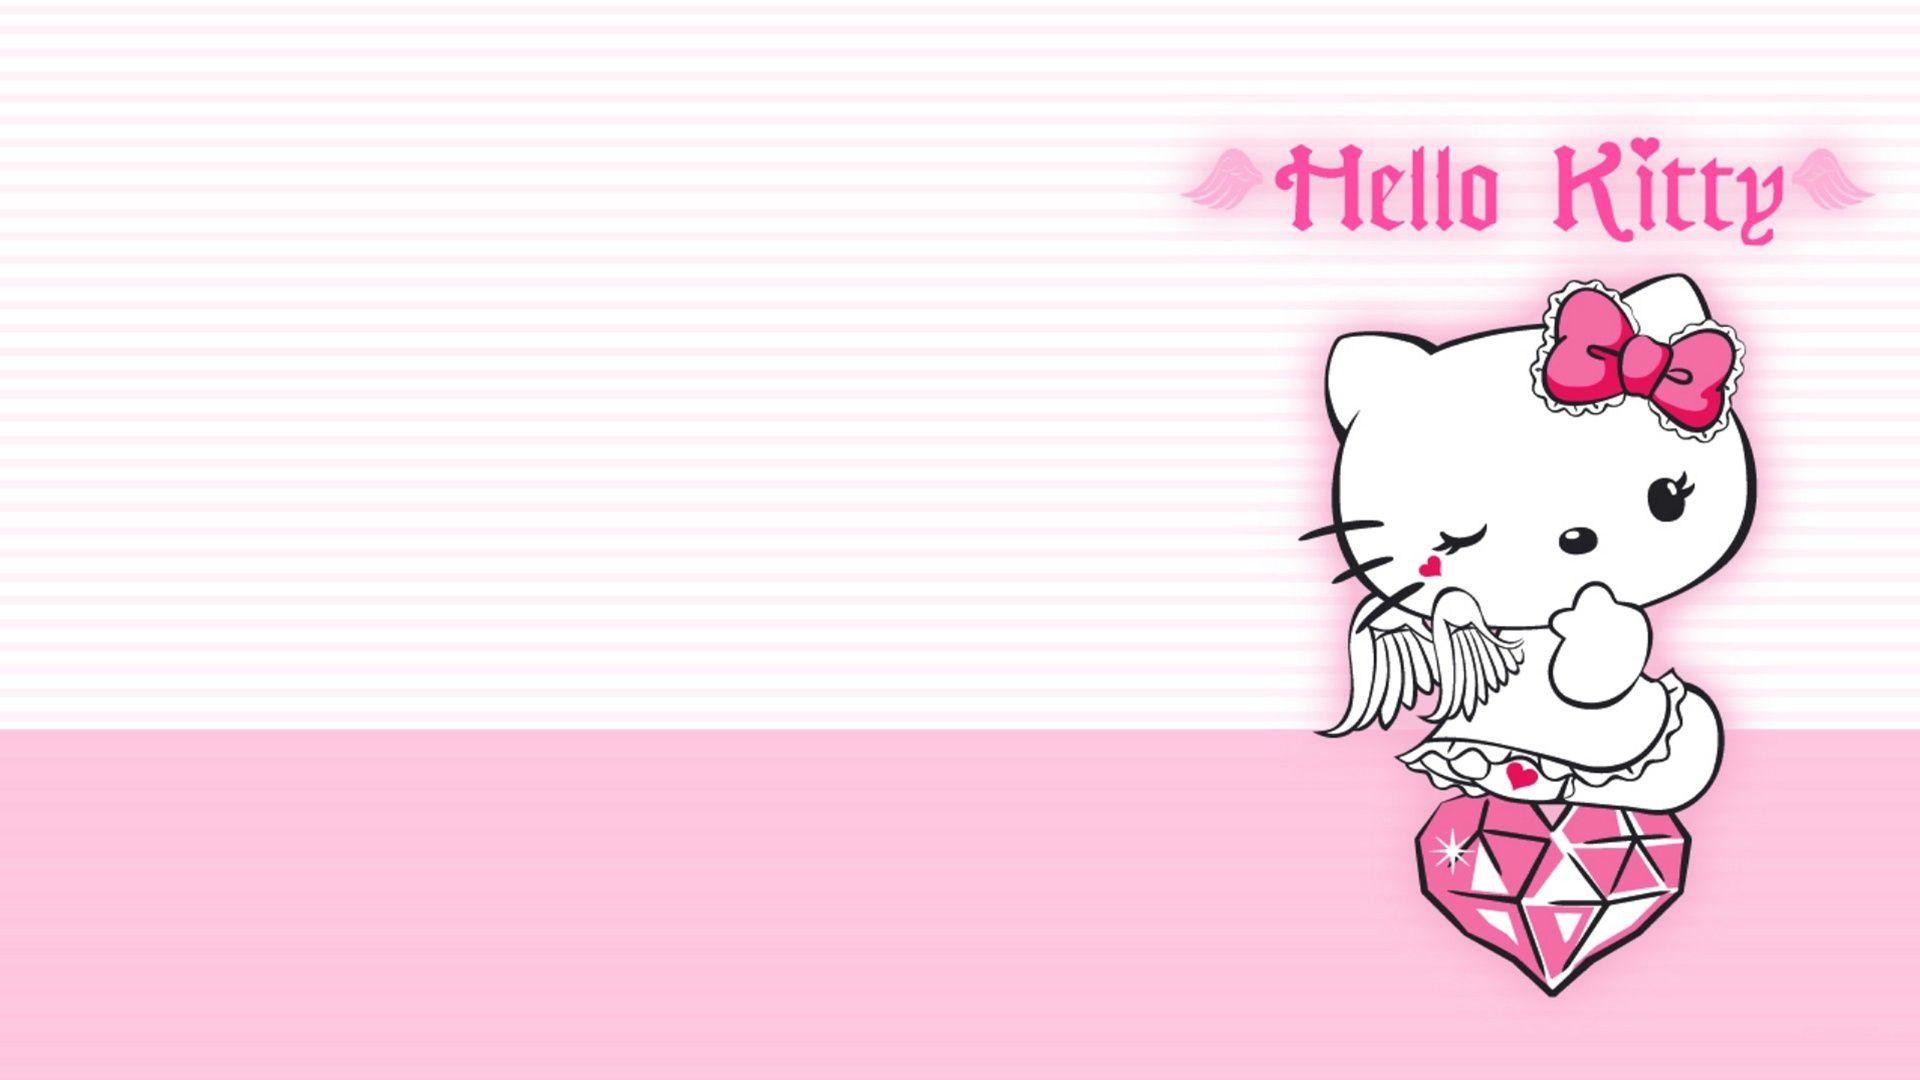 1920x1080 Wallpapers For > Hello Kitty Birthday Wallpaper Hd